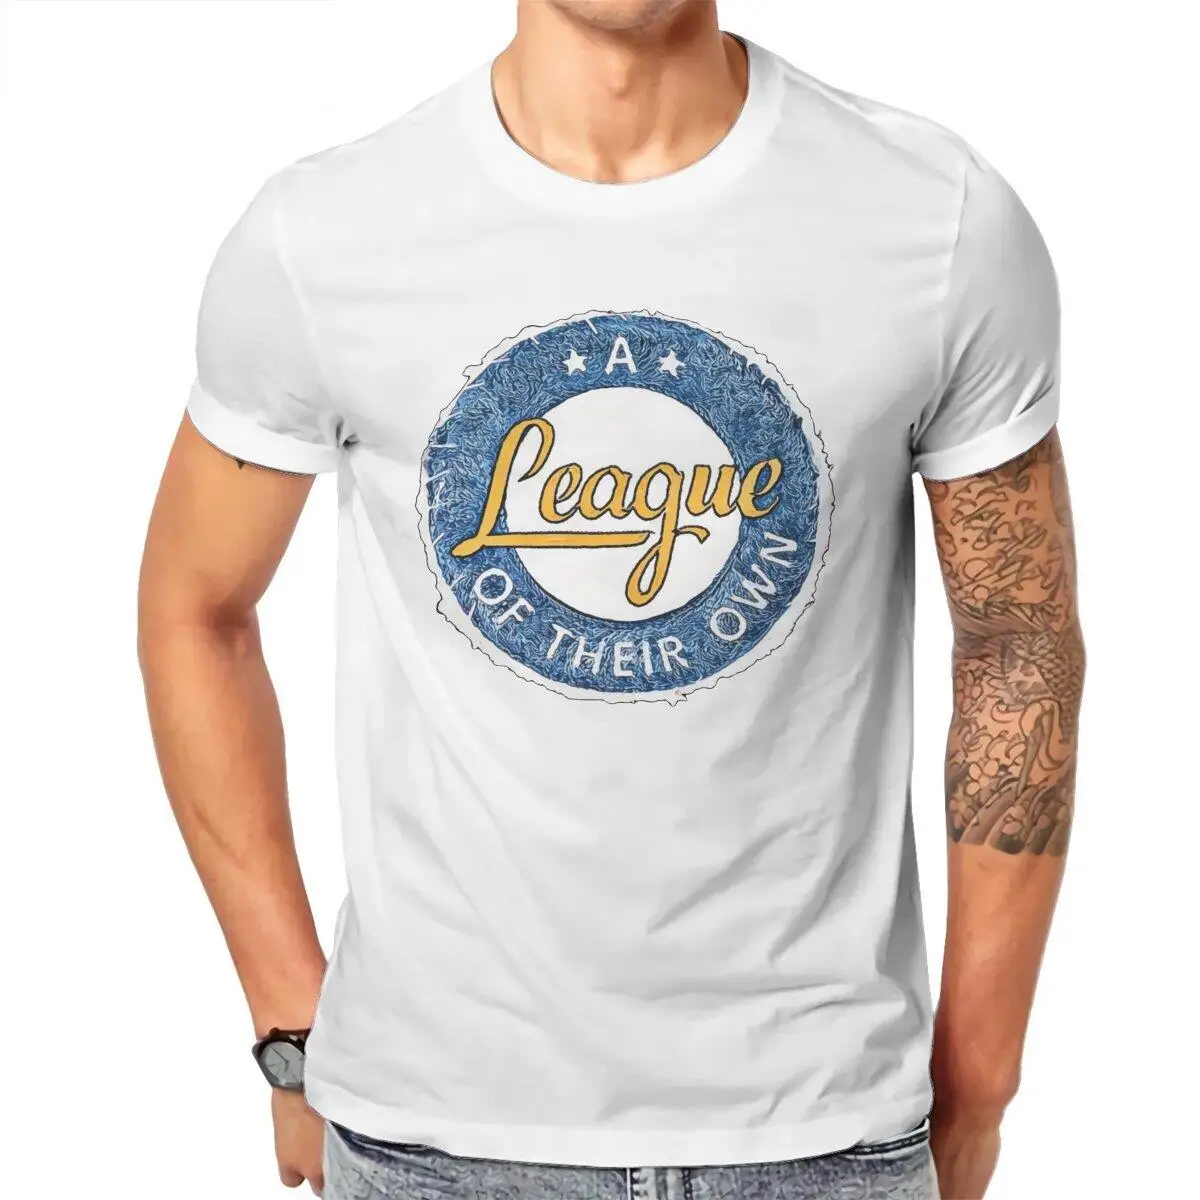 A League of Their Own  T-Shirts Men Baseball Leisure Cotton Tees Crew Neck Short Sleeve T Shirt Plus Size Clothes